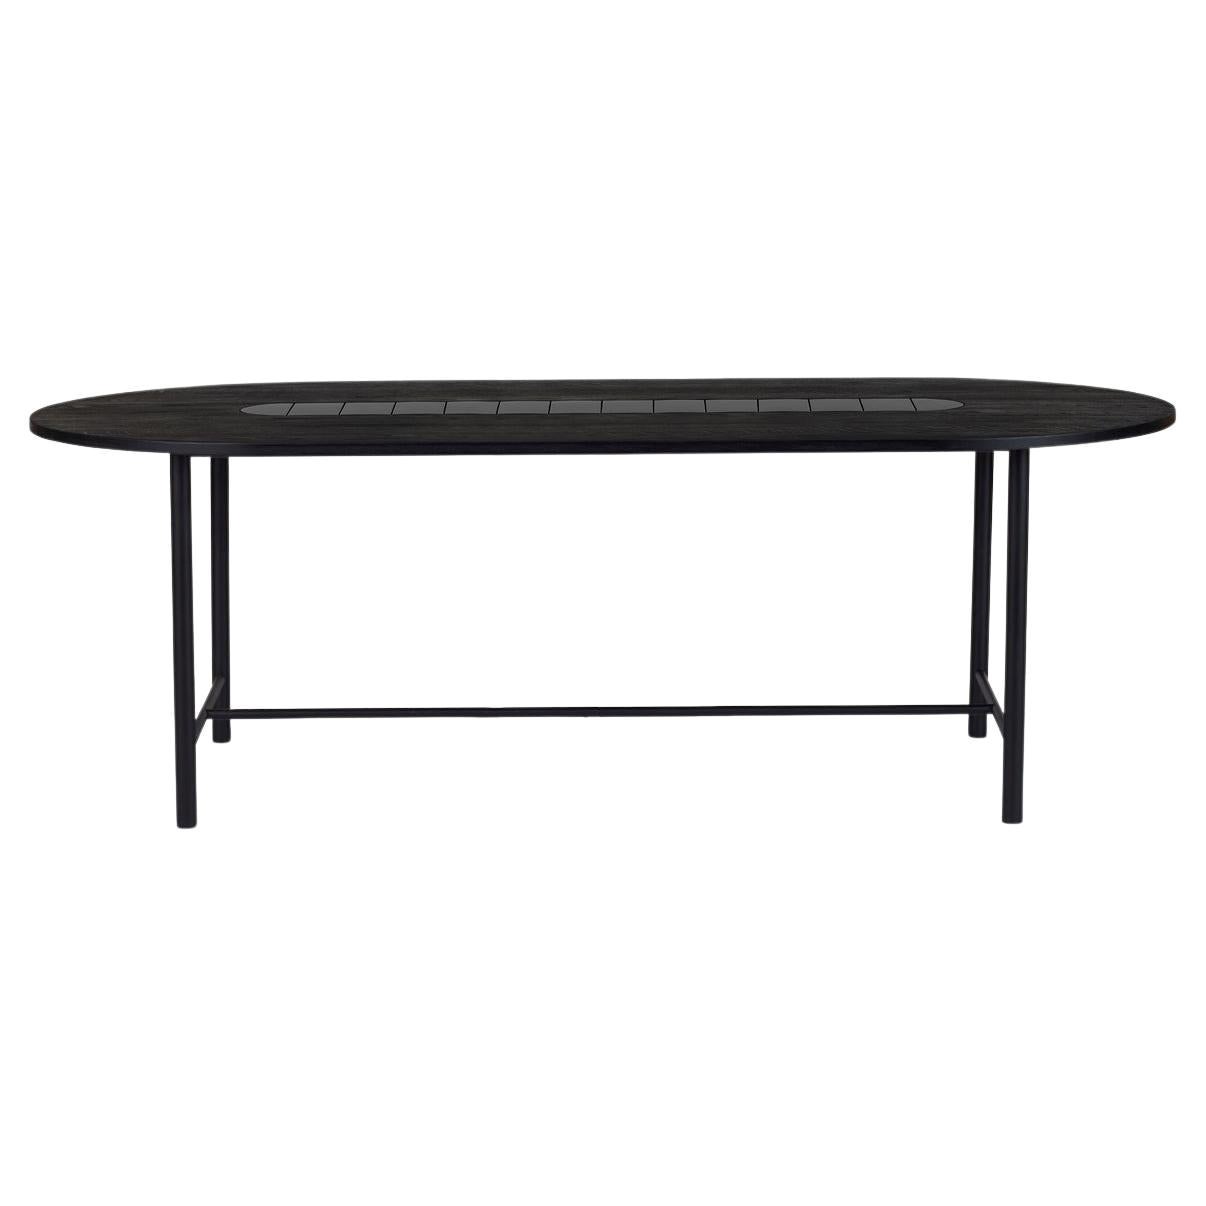 Be My Guest Dining Table 240 Black Oak Soft Black Tiles by Warm Nordic For Sale